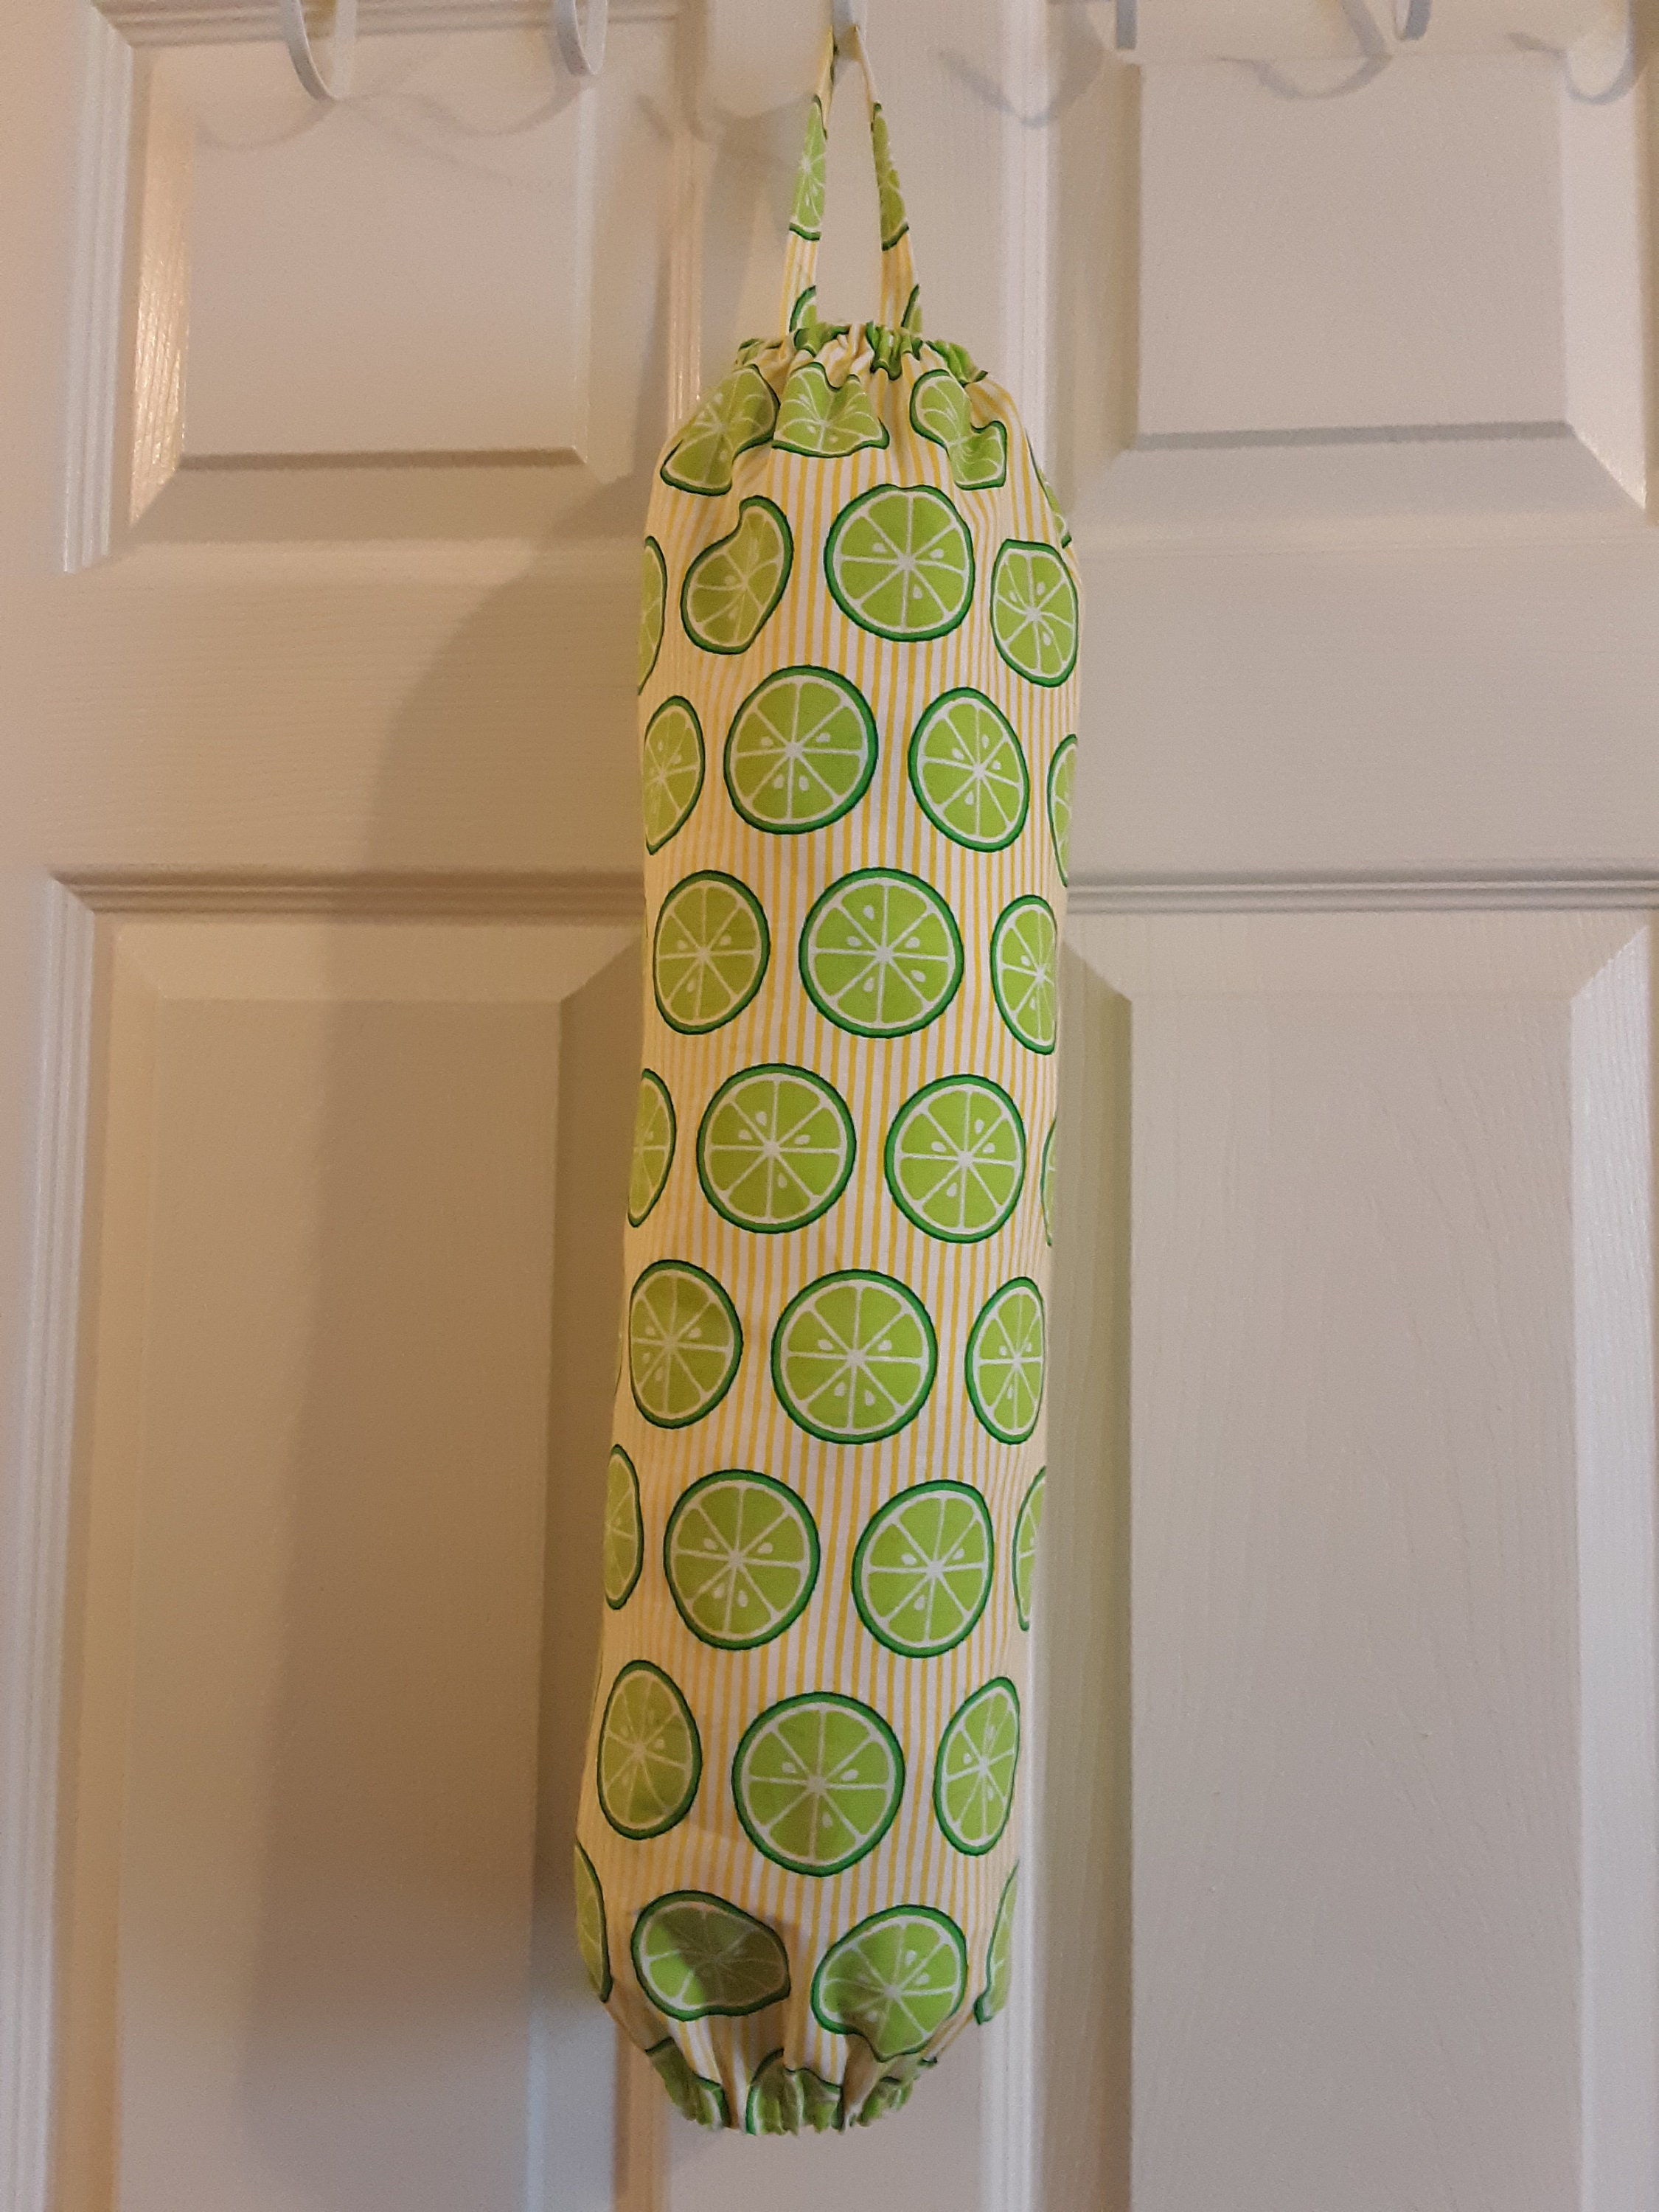 DIY Grocery Bag Holder! Easy and Cheap to make!